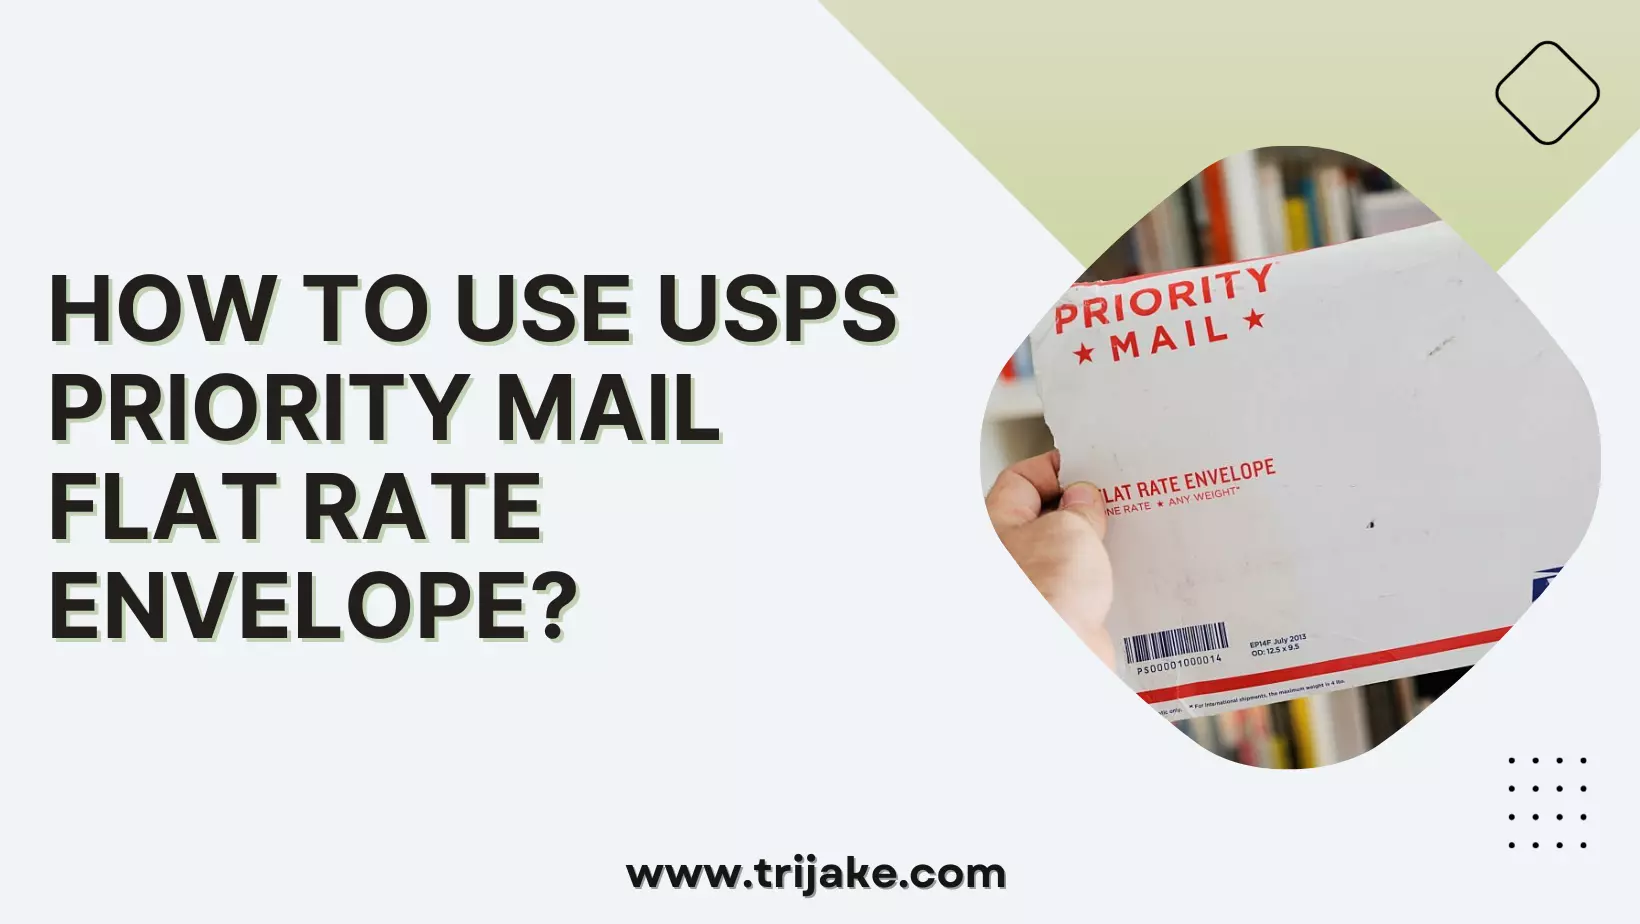 USPS Priority Mail Flat Rate Envelope